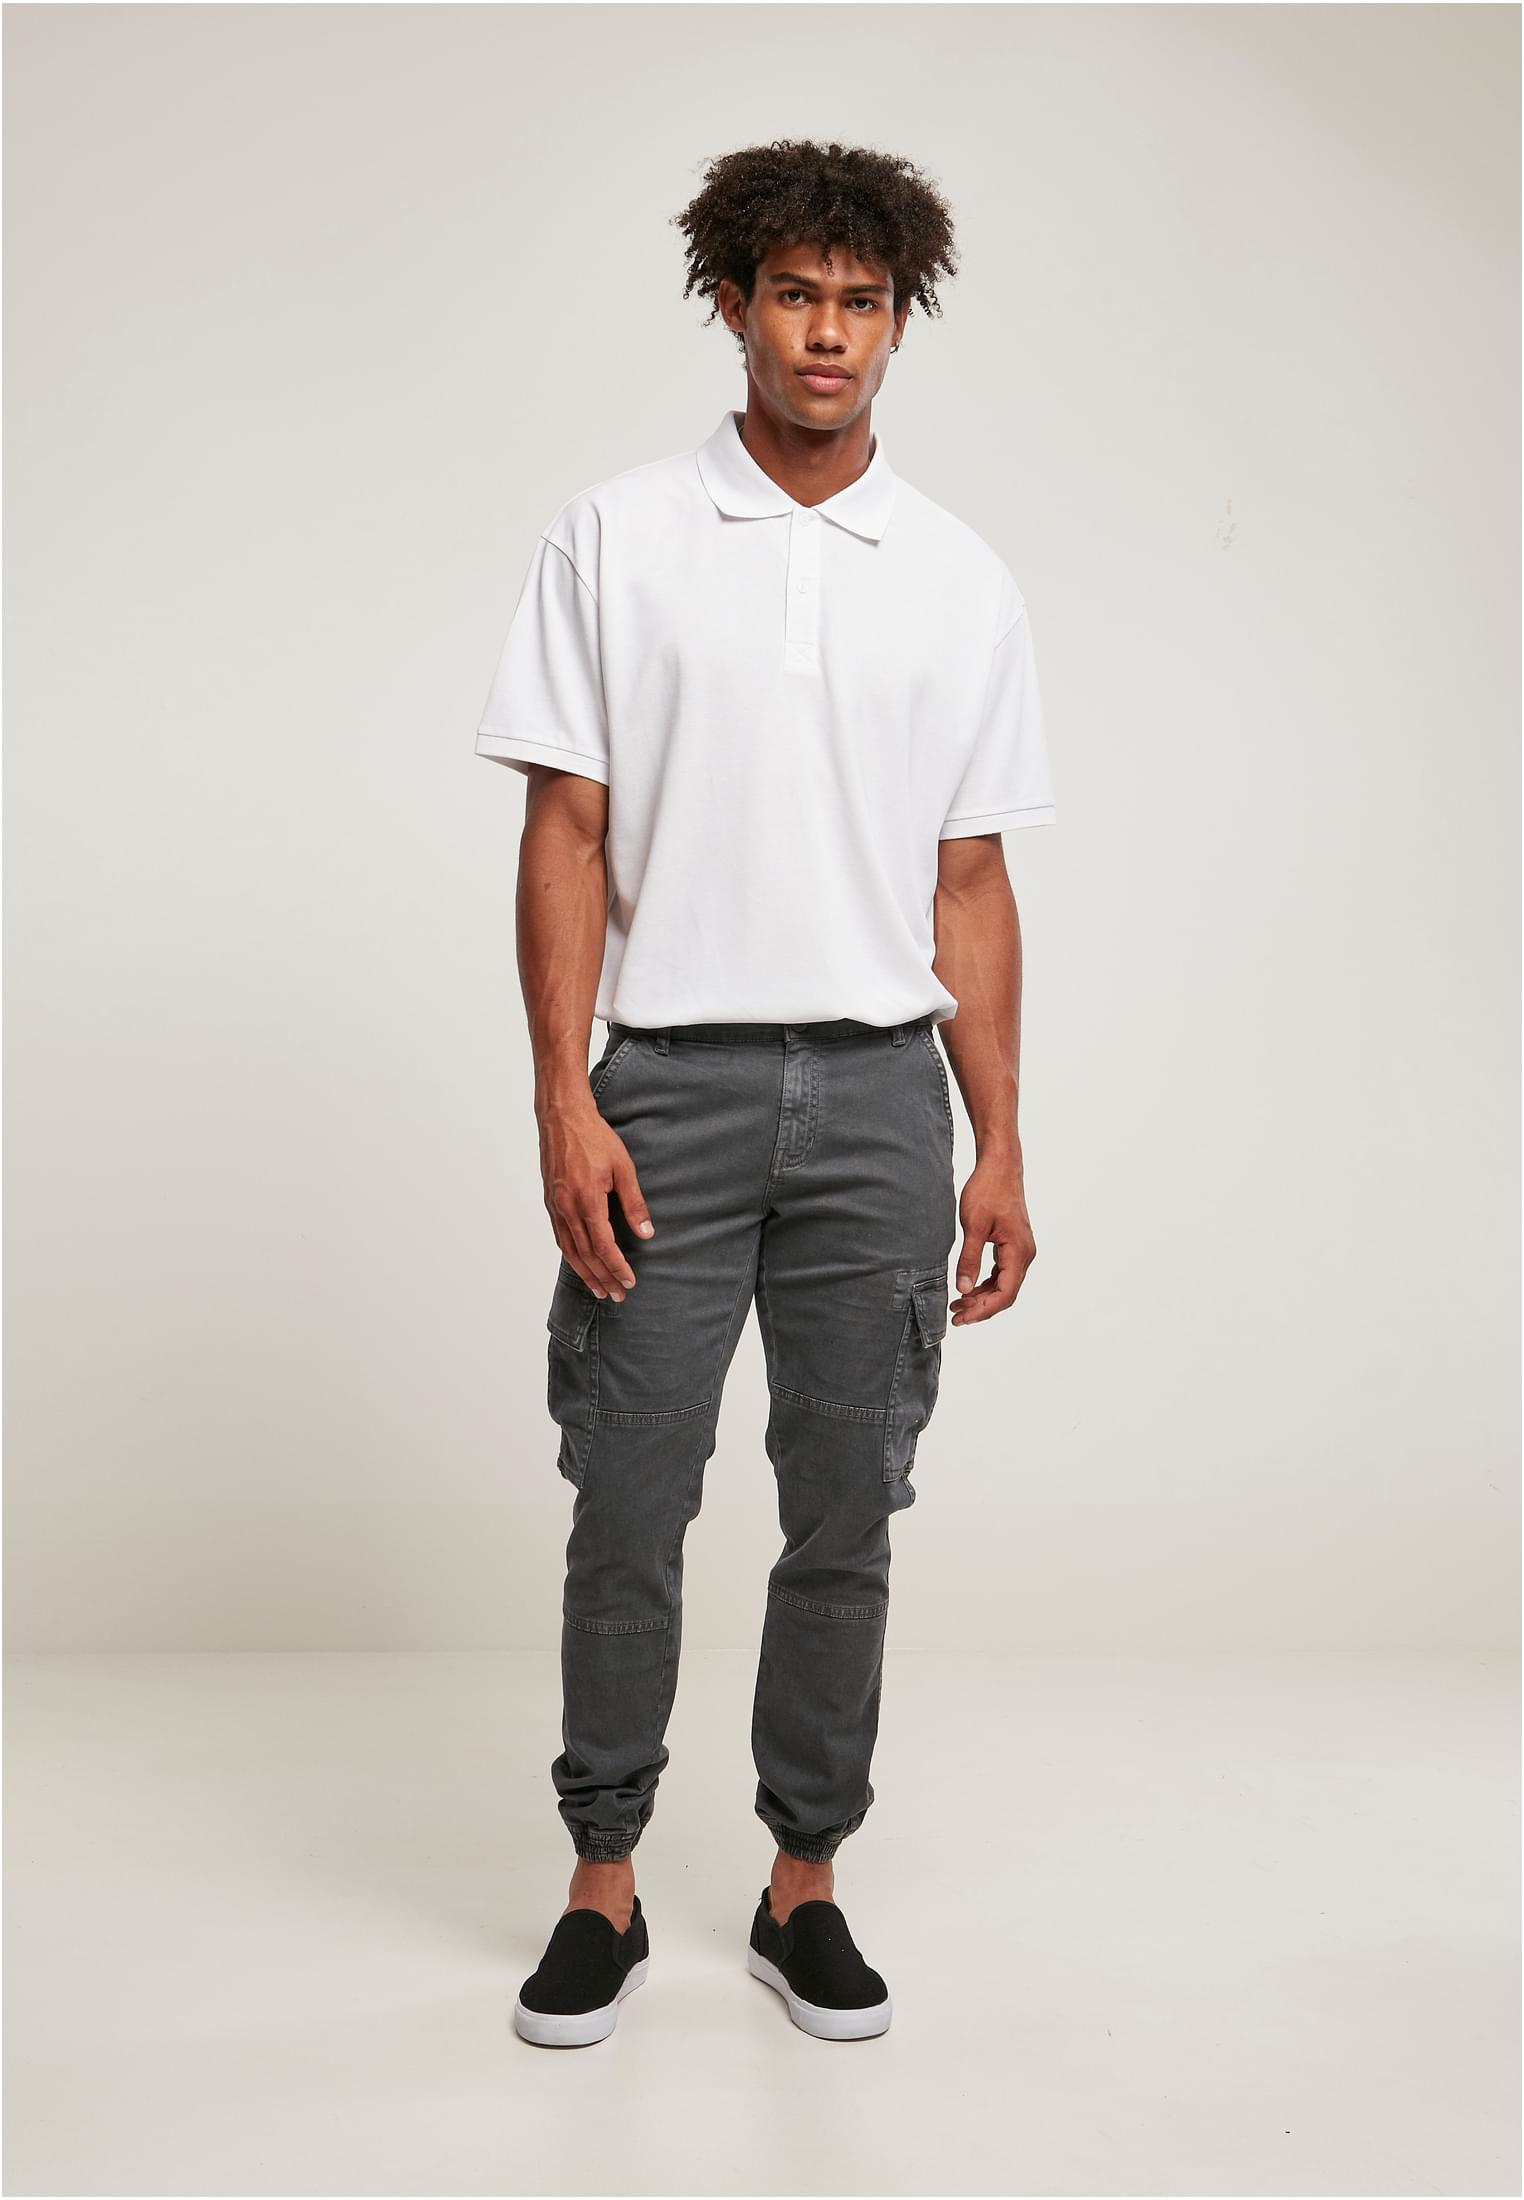 Sweatpants Washed Cargo Twill Jogging Pants in Farbe darkshadow